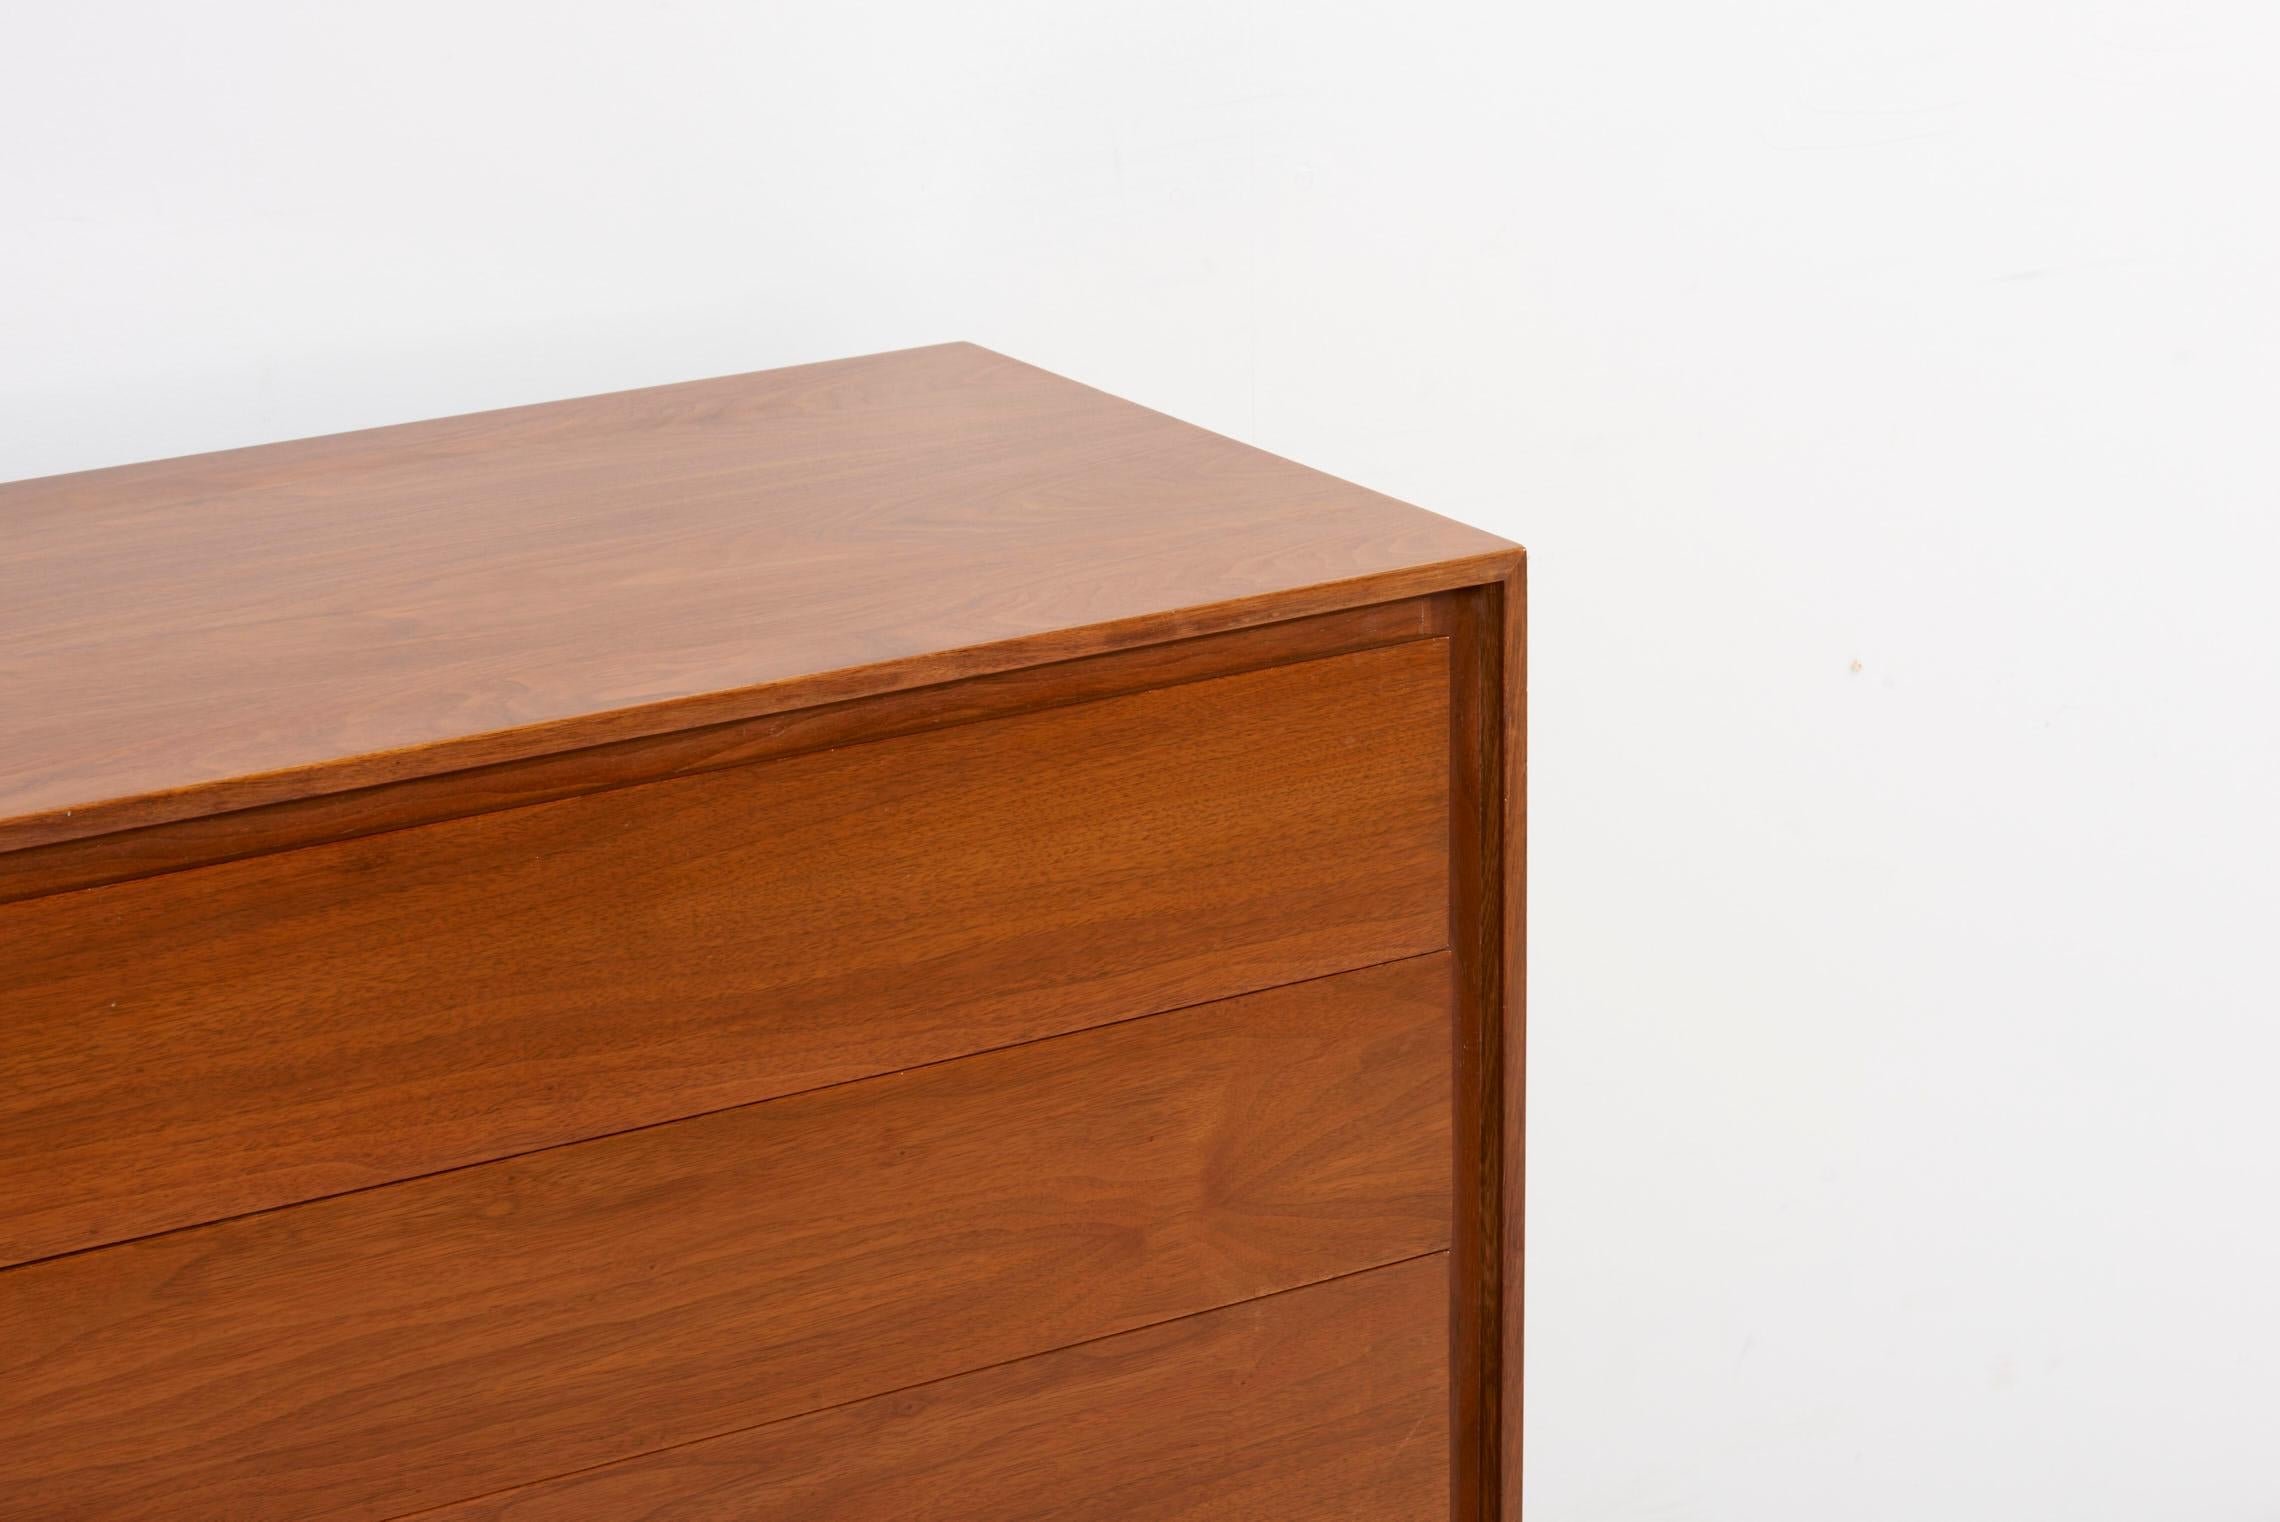 Modernist Sideboard in Walnut by Allan Gould, USA 1960s For Sale 6